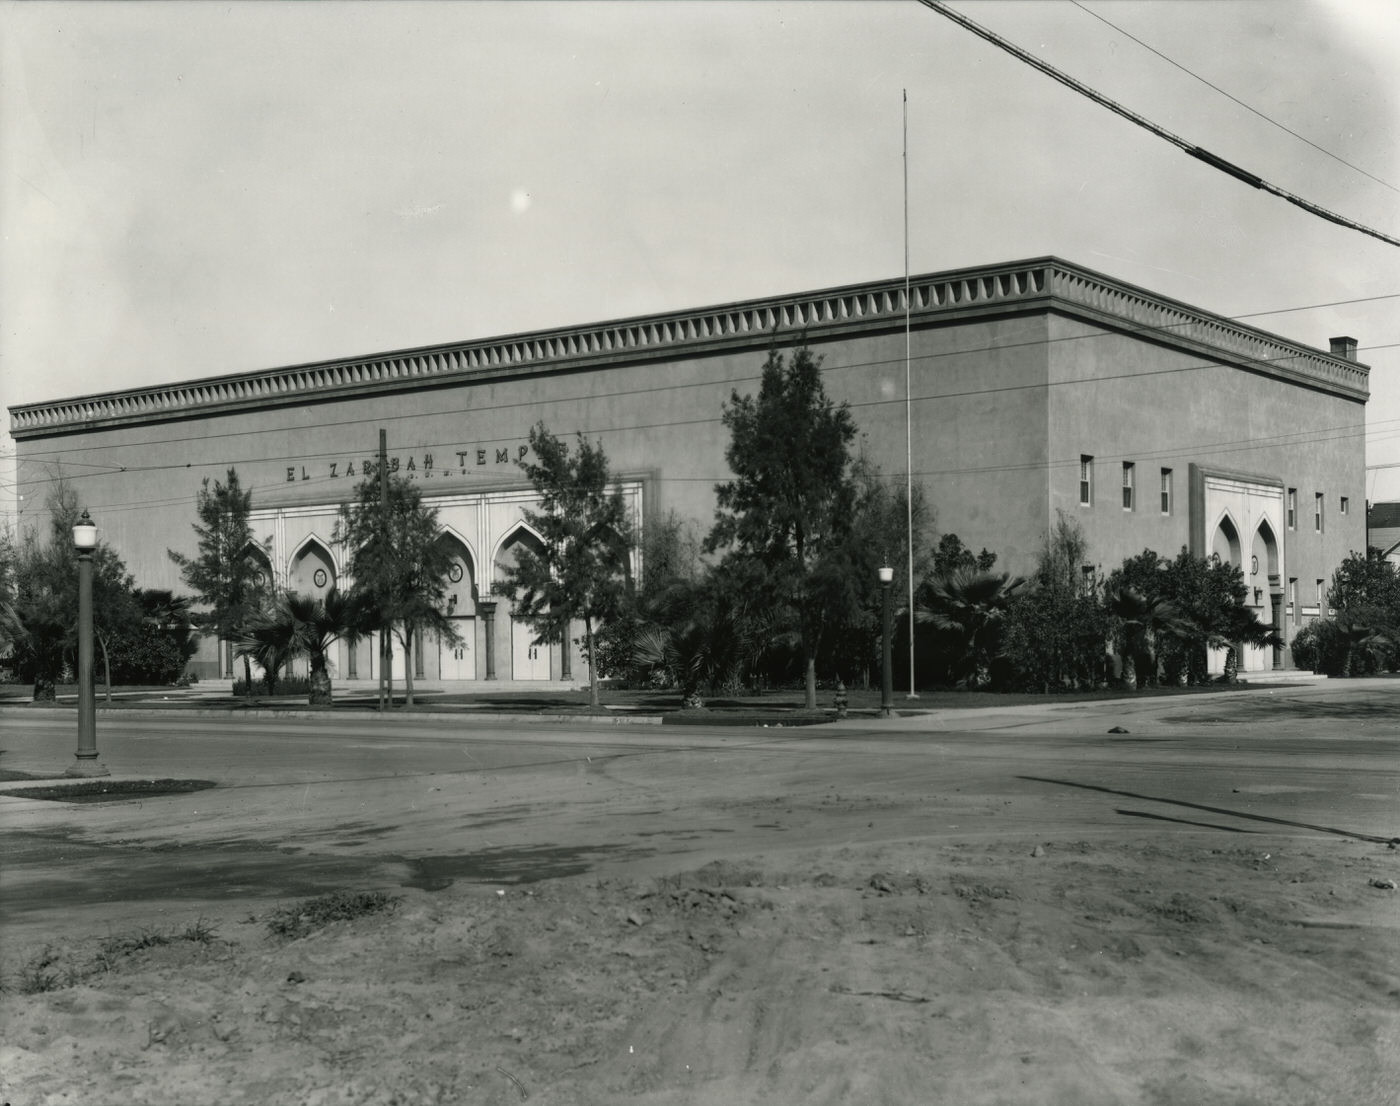 El Zaribah Shrine Temple Exterior. This building was located on 15th Ave. and Washington Street in Phoenix, 1930s